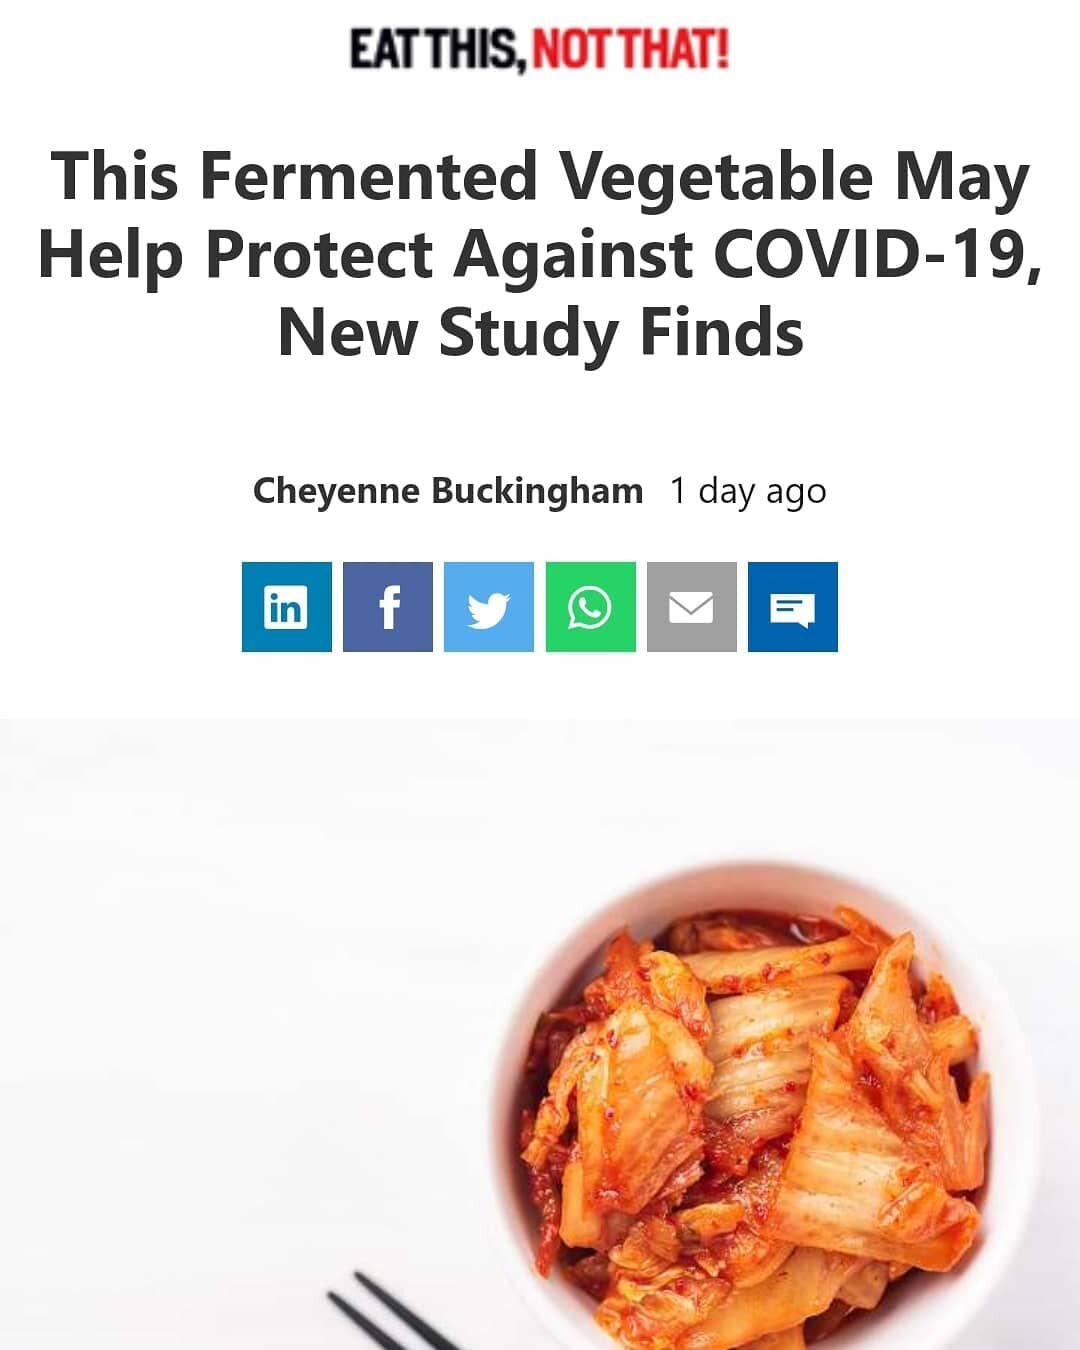 Order yours today! The best Kimchi in LA!
213-739-1919
https://www.msn.com/en-us/health/nutrition/this-fermented-vegetable-may-help-protect-against-covid-19-new-study-finds/ar-BB1713oL?ocid=sf